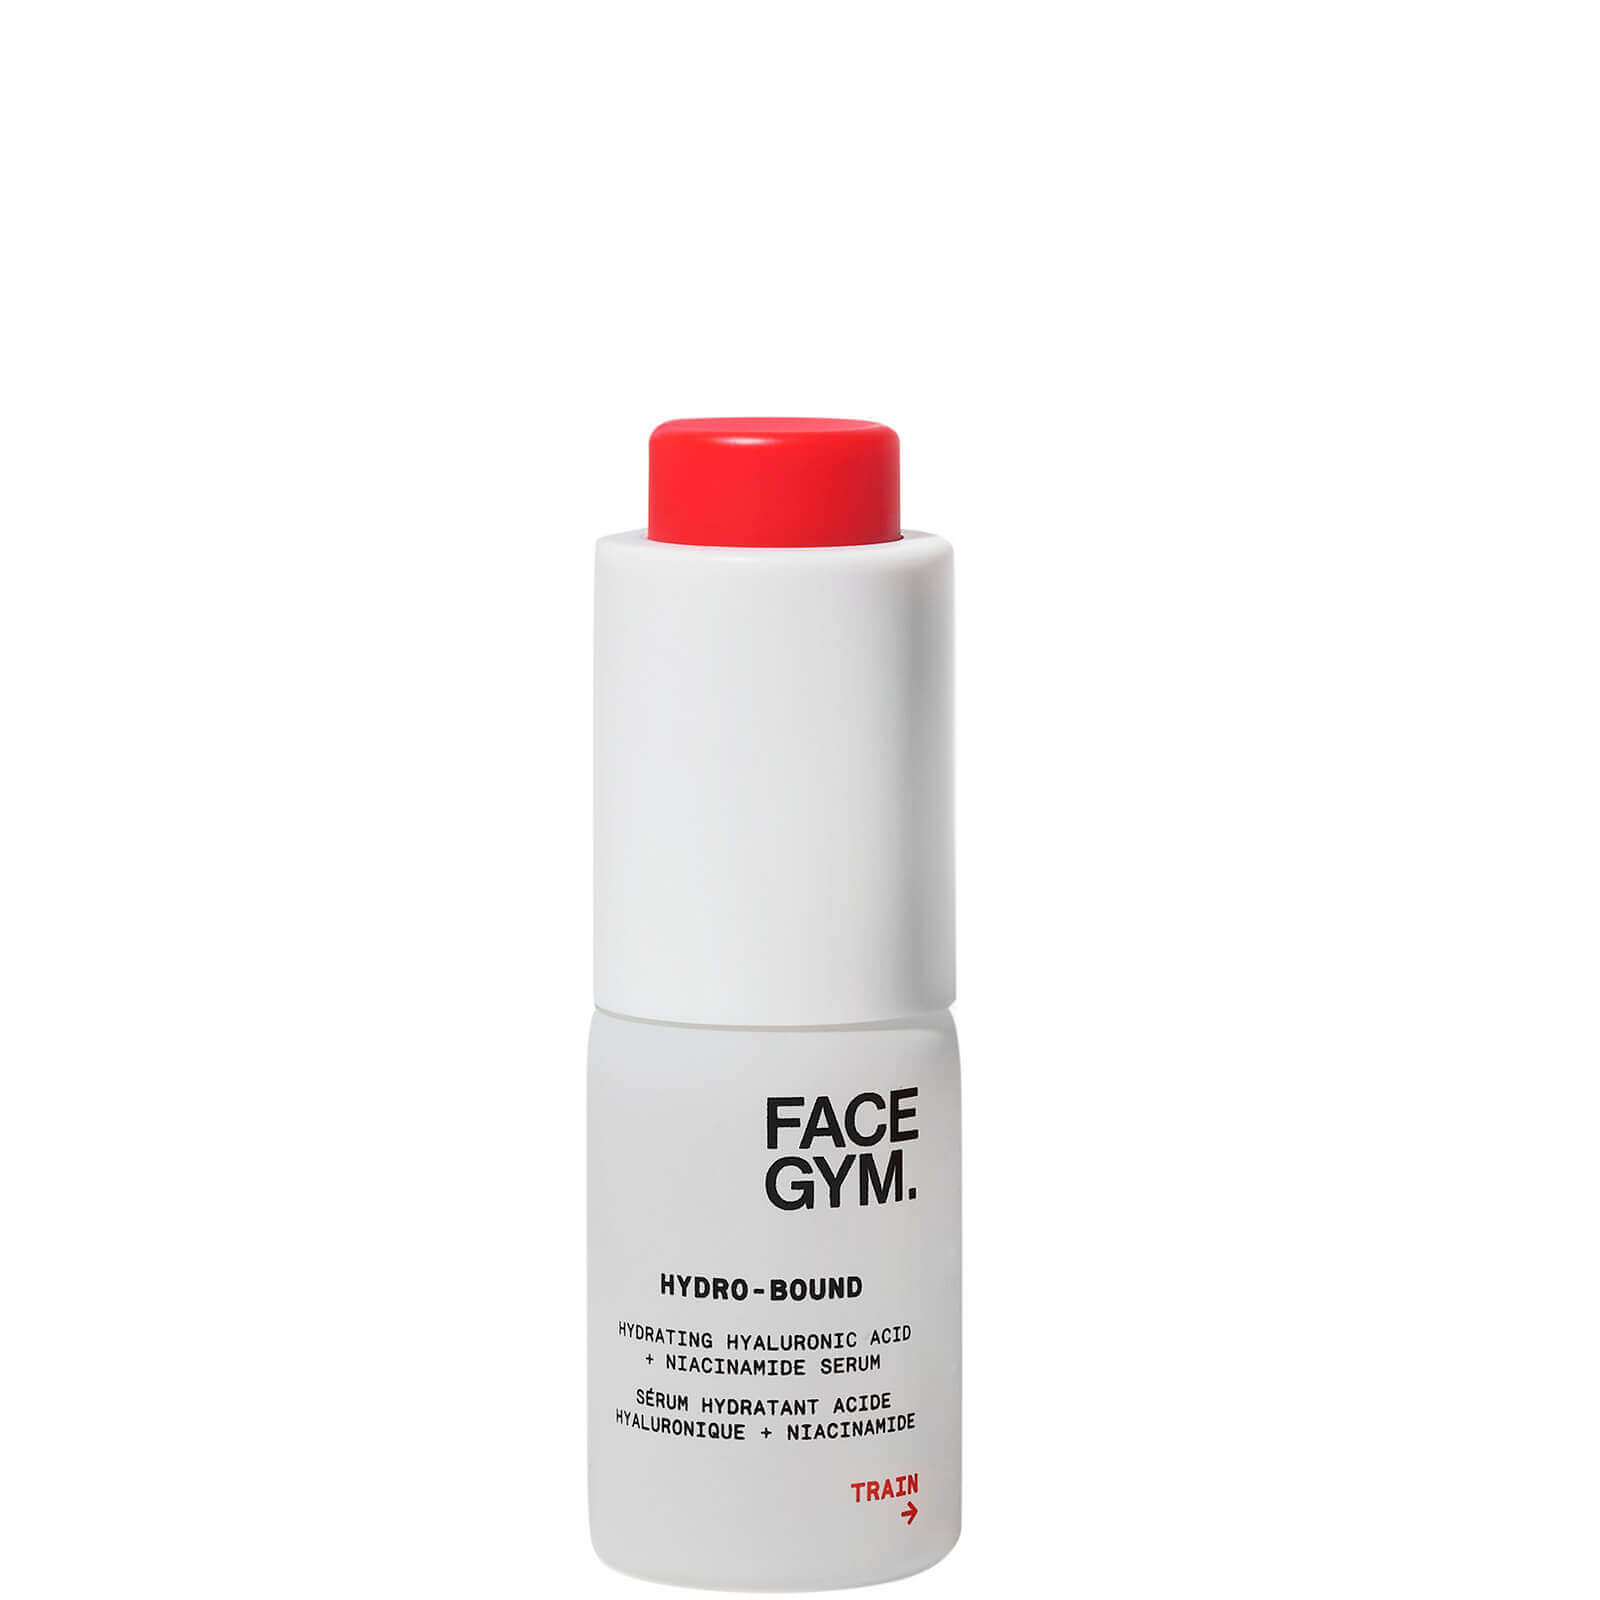 Image of FaceGym Hydro-bound Hydrating Hyaluronic Acid and Niacinamide Serum (Various Sizes) - 15ml